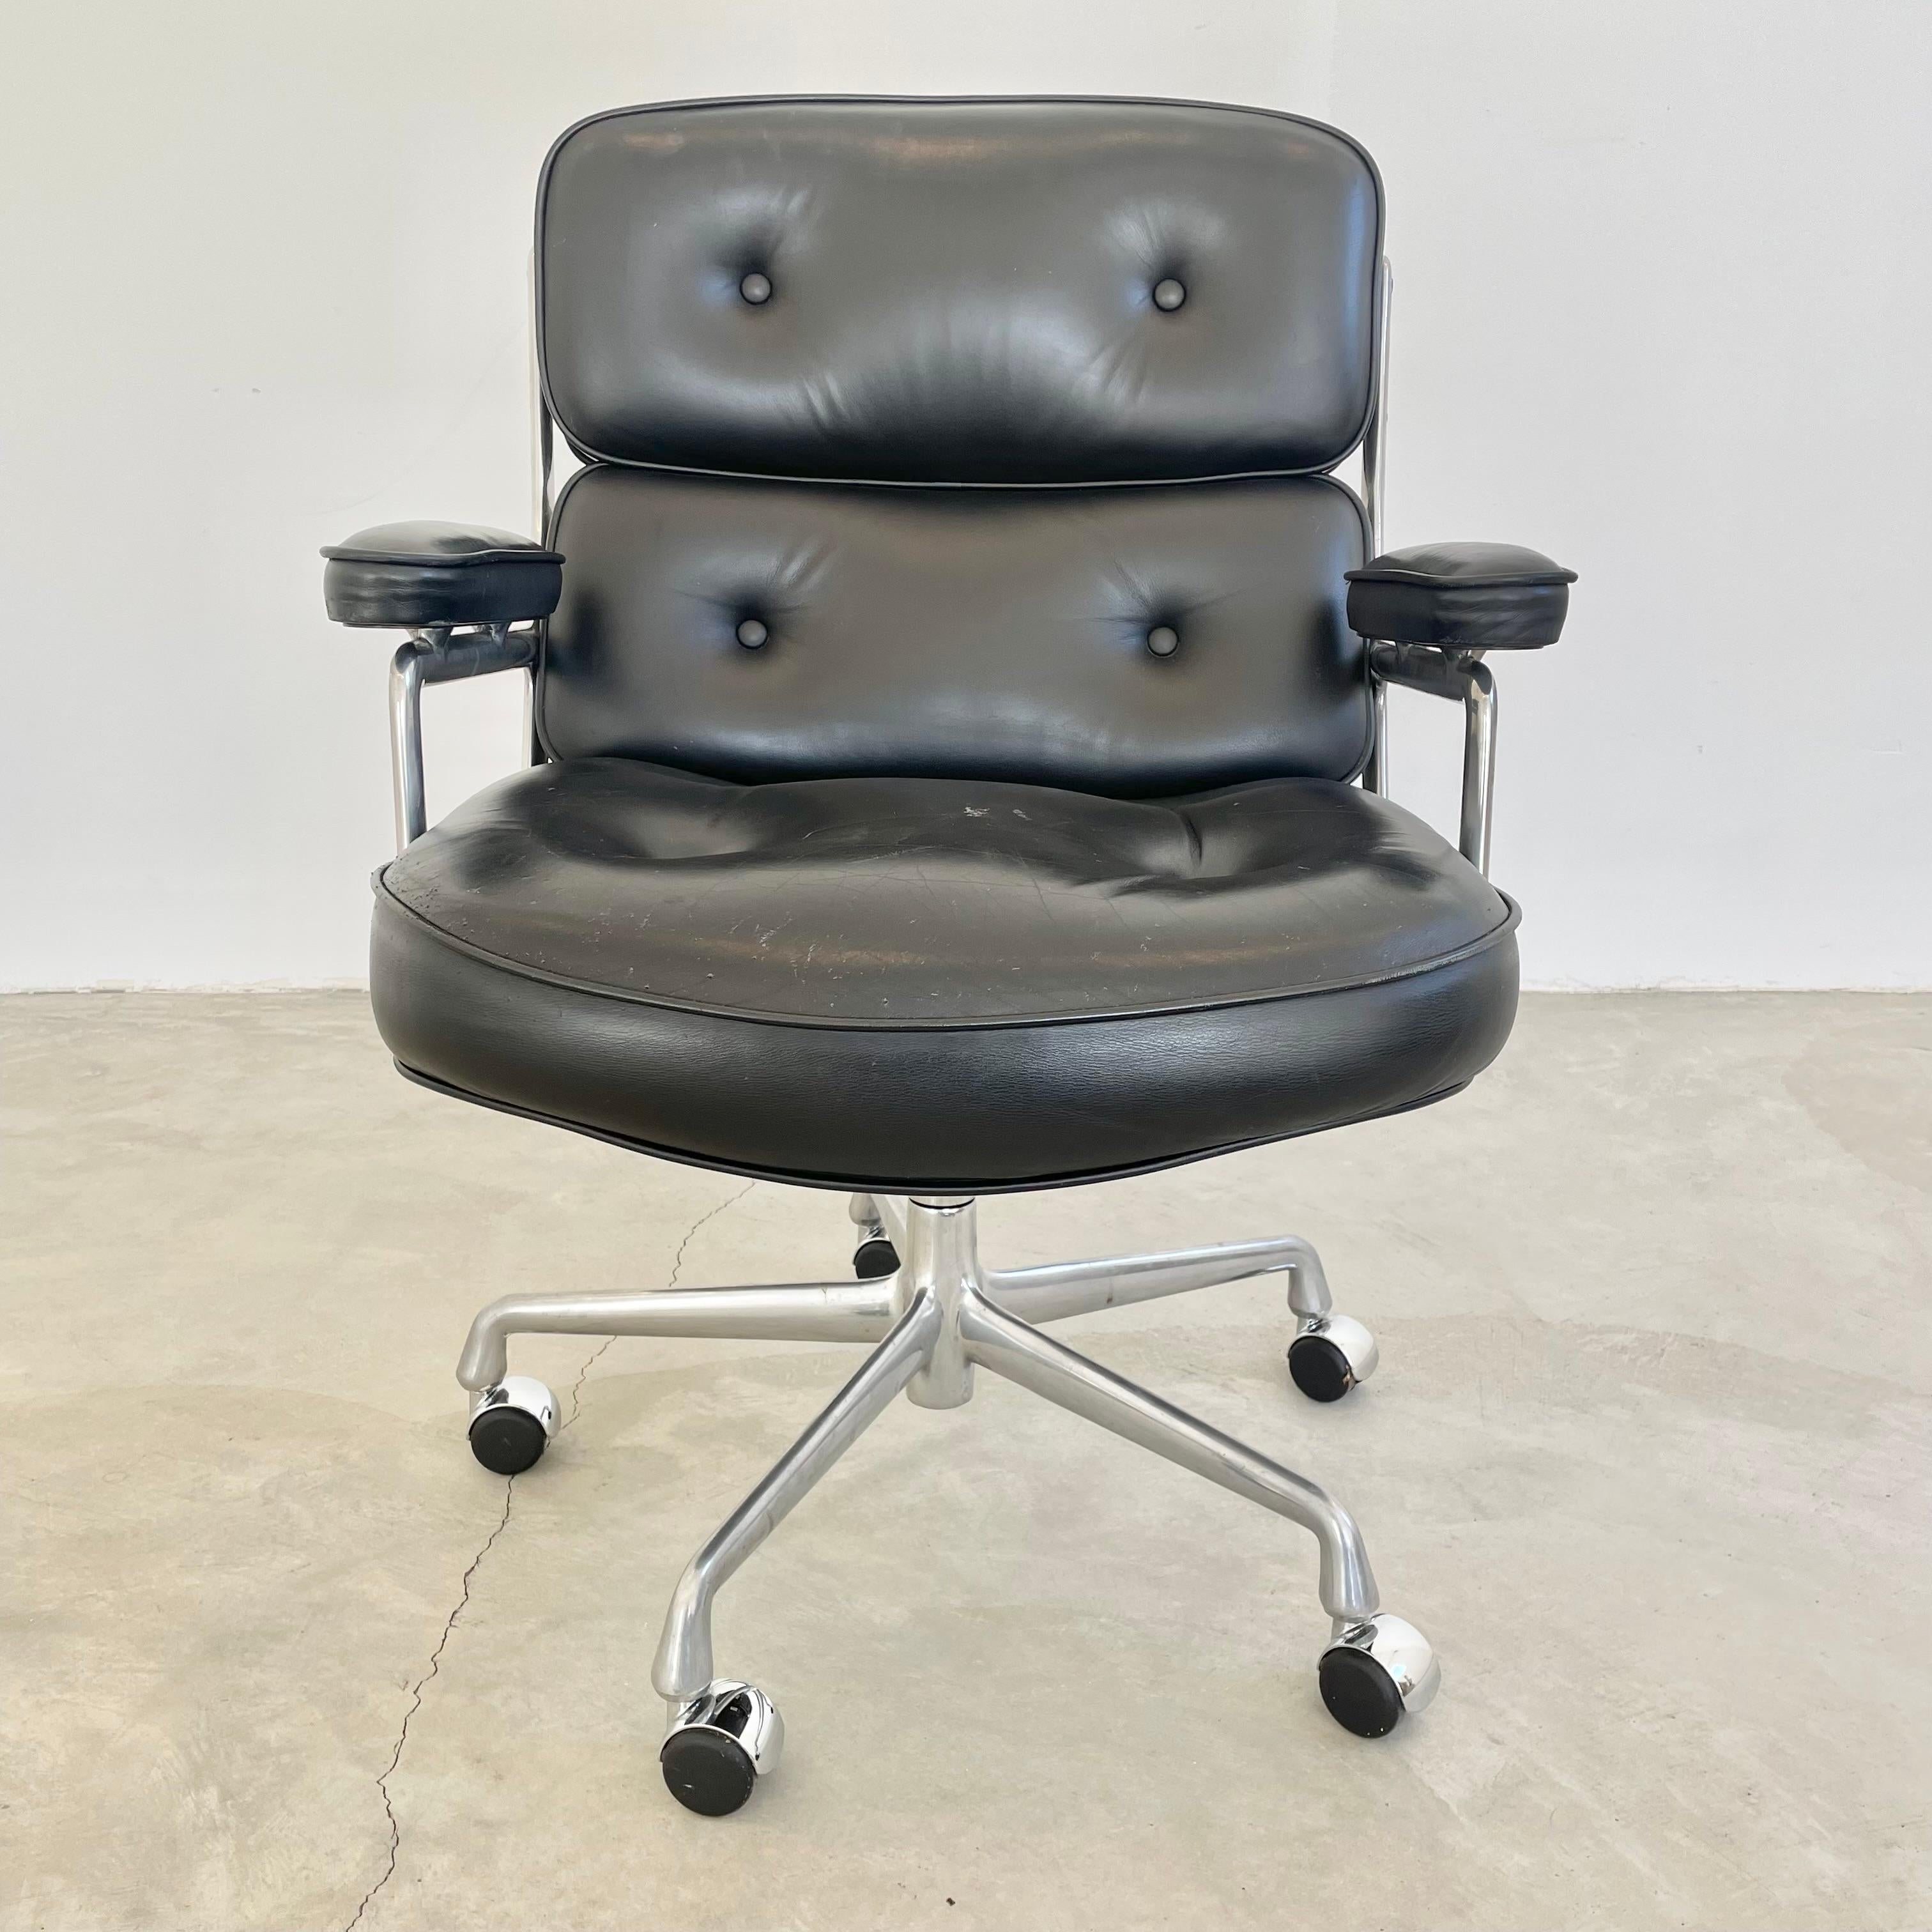 Classic Eames Time Life swivel chair in black leather with an aluminum frame. All original with some wear as shown. Knob under the seat for adjusting recliner as well as the height adjustor. Extremely comfortable. Chair swivels, reclines and is